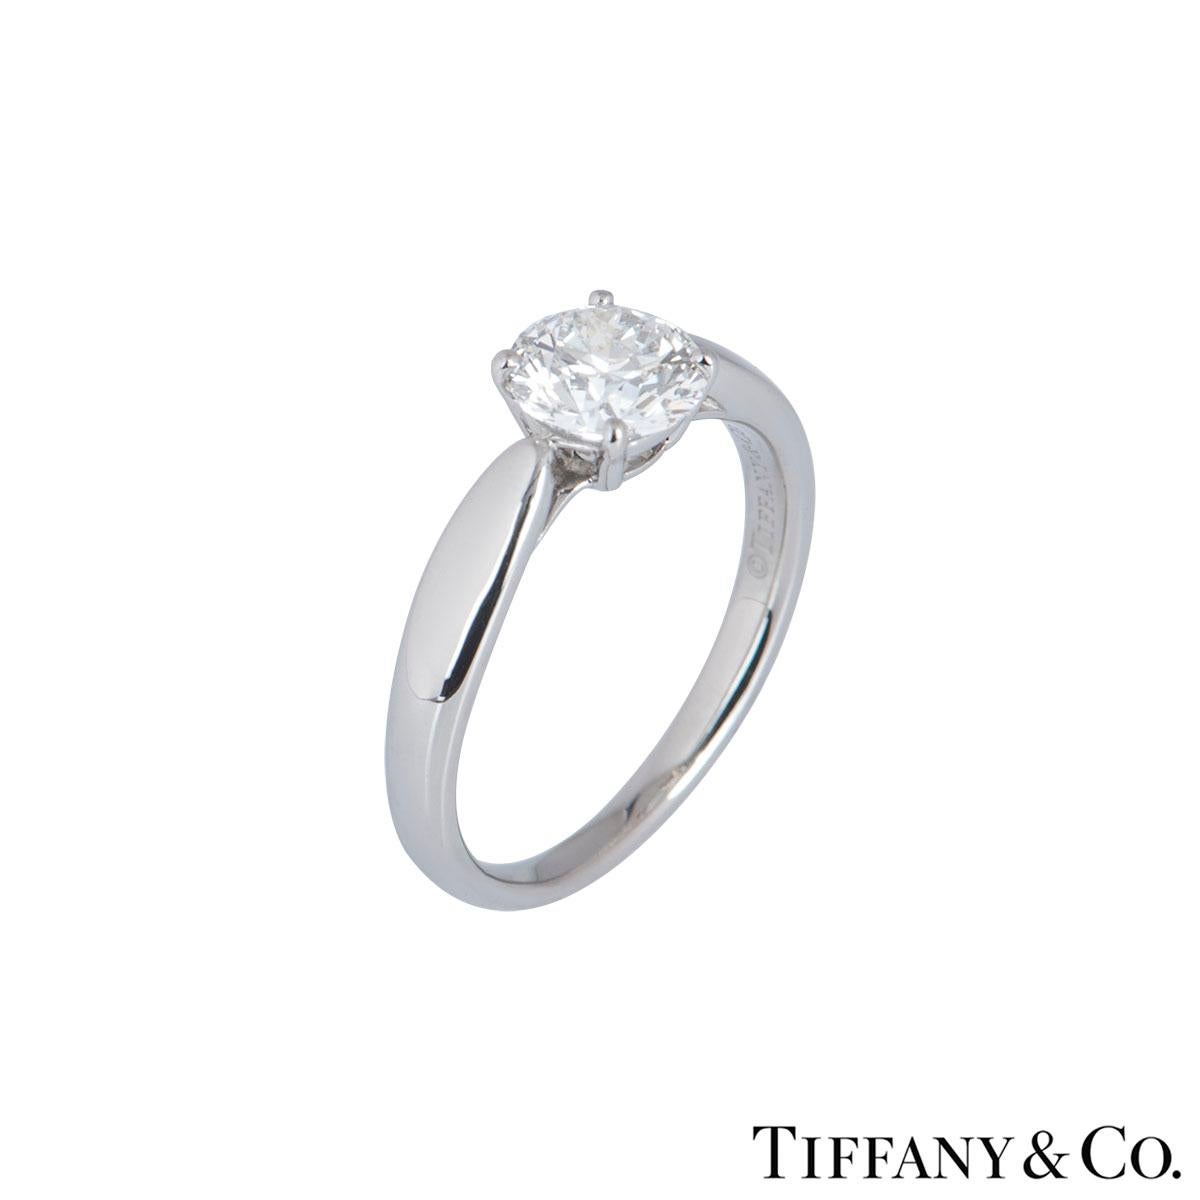 A stunning platinum diamond ring by Tiffany & Co. from the Harmony collection. The ring comprises of a round brilliant cut diamond in a 4 claw setting with a weight of 0.91ct, G colour and VS2 clarity. The ring is a size UK K/US 5/EU 50 but can be